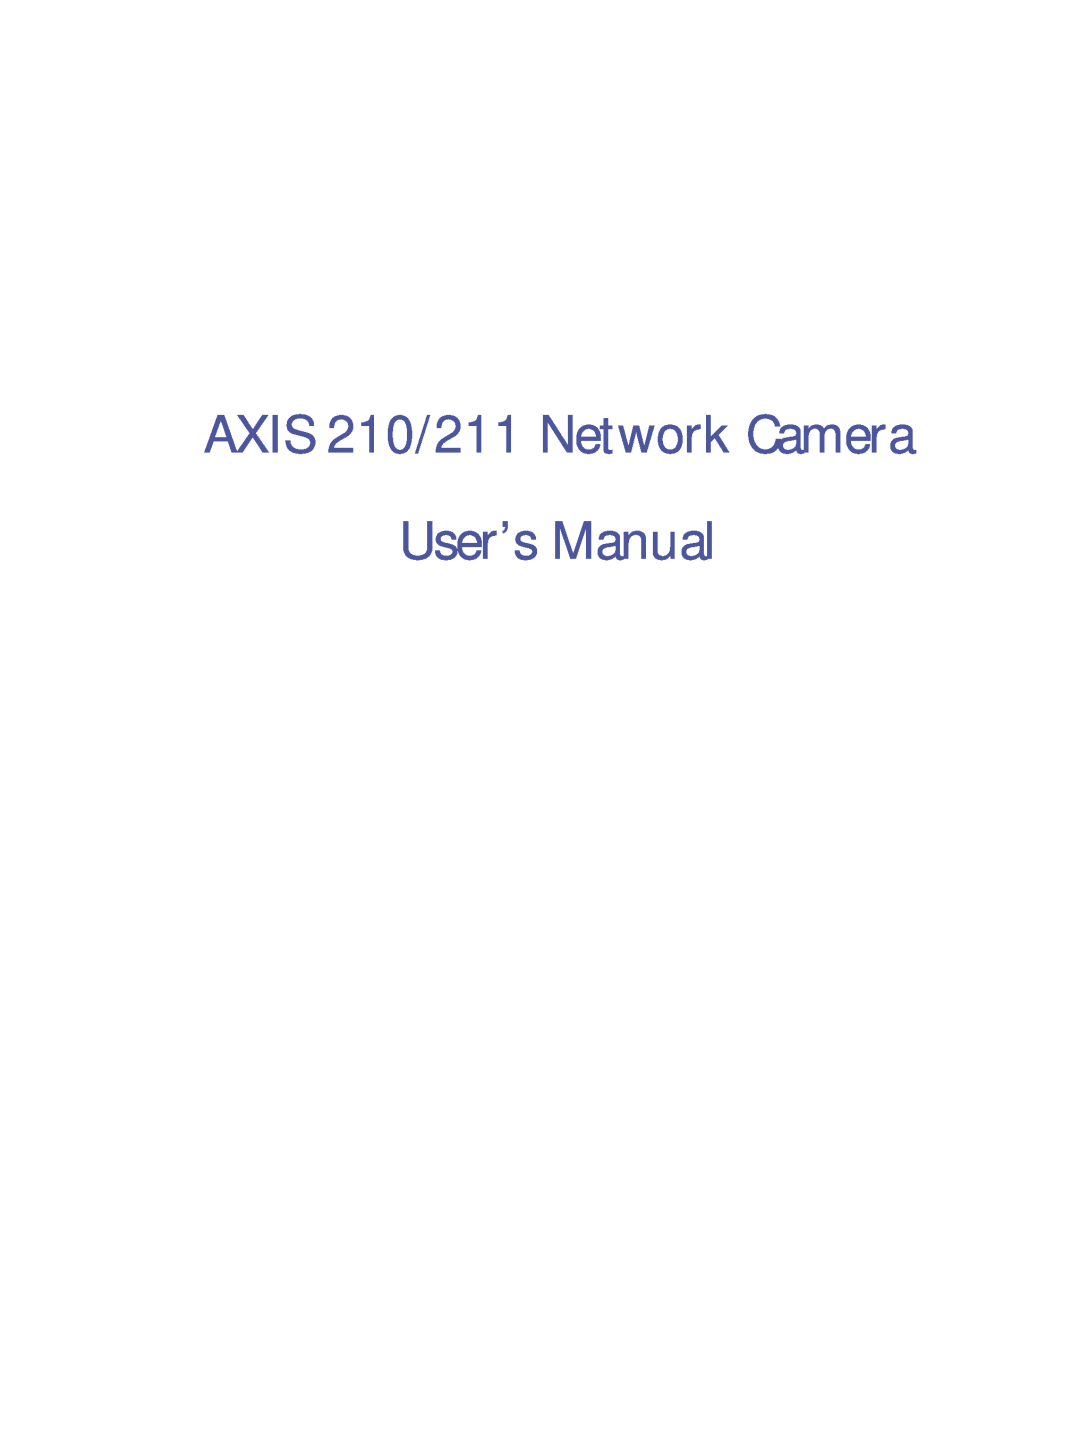 Axis Communications user manual AXIS 210/211 Network Camera, User’s Manual 